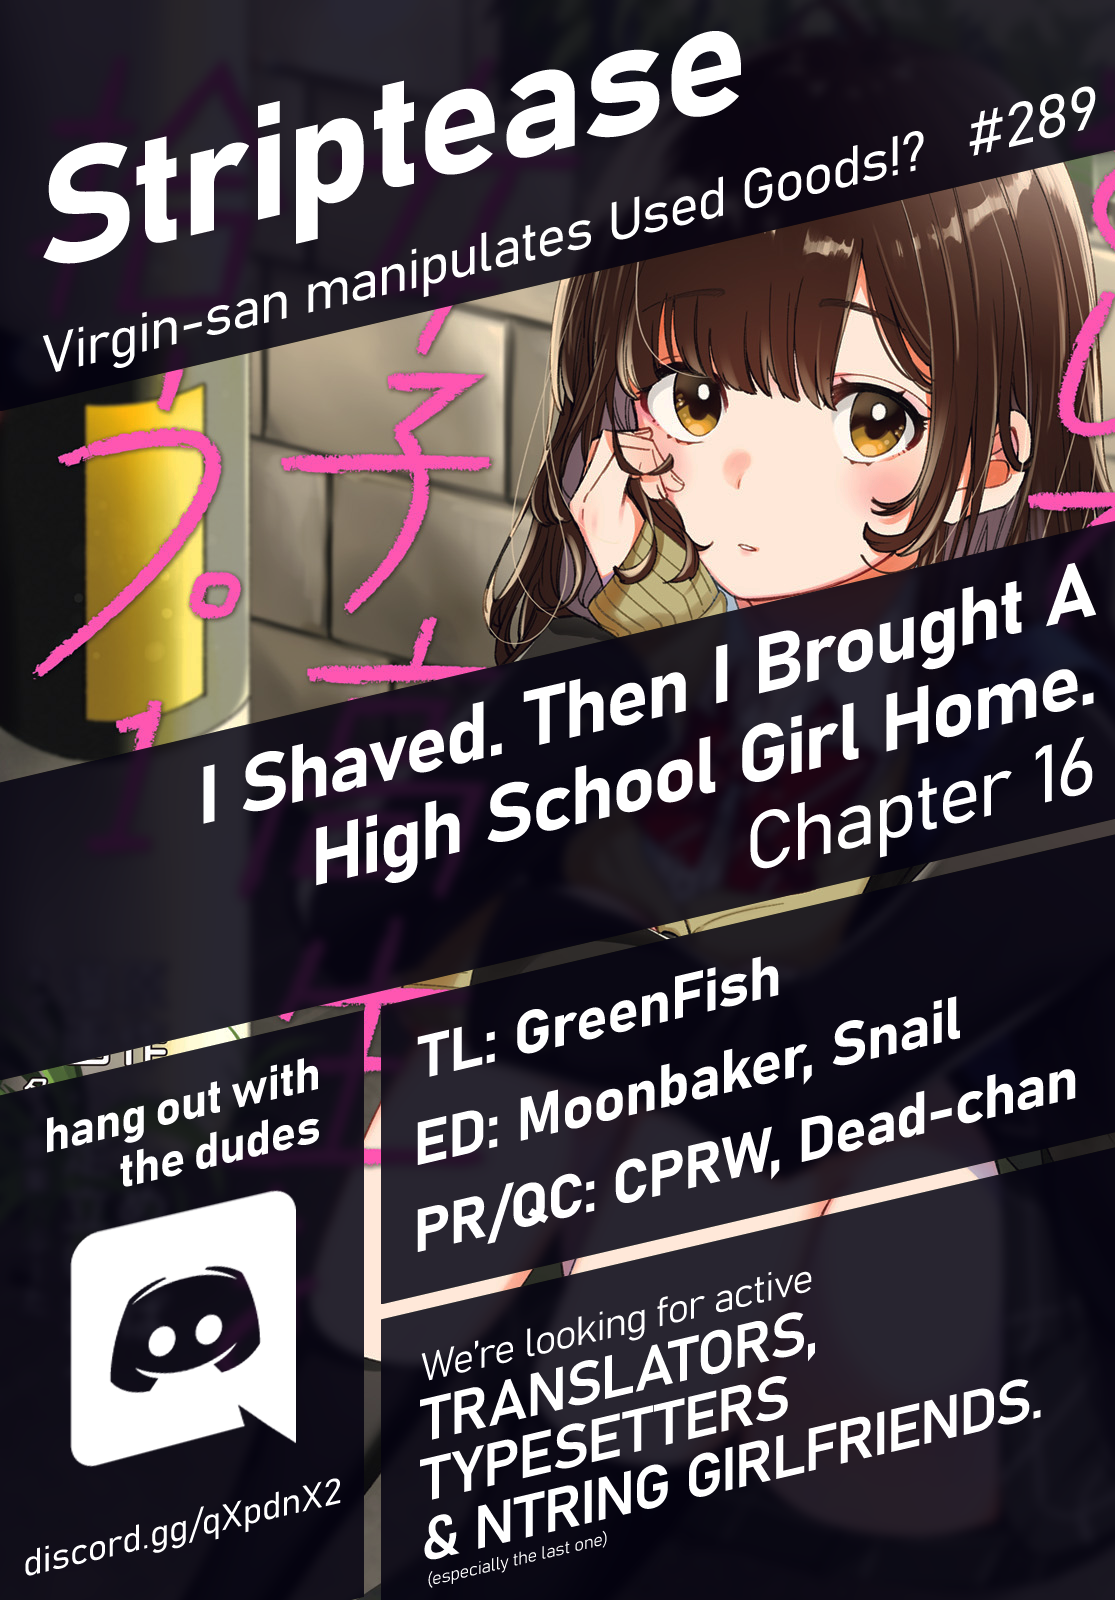 I Shaved. Then I Brought A High School Girl Home. Chapter 16